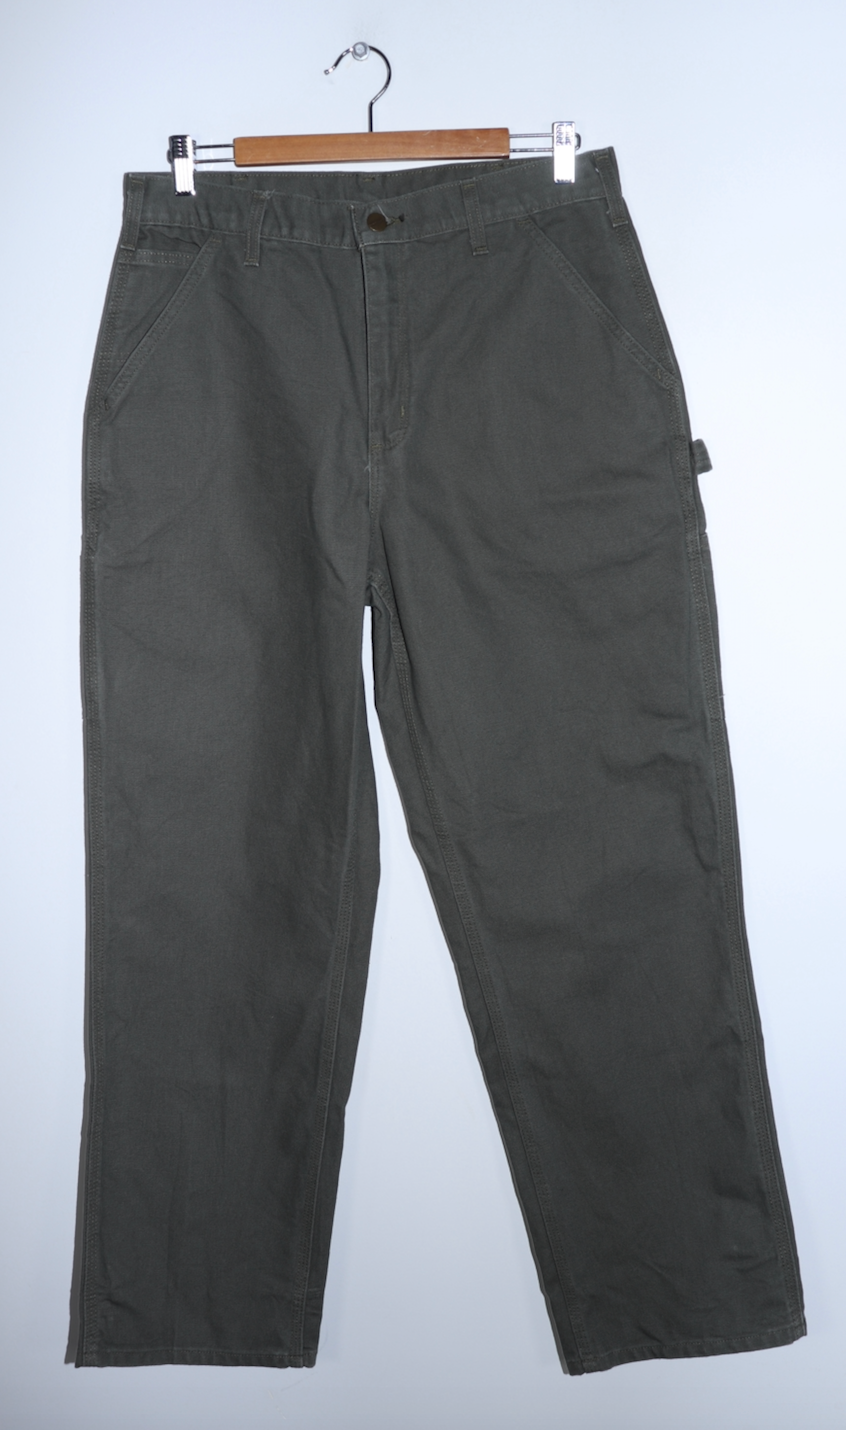 Vintage Carhartt Thick Moss Green Carpenter Pants 34 X 30 – Curated by ...